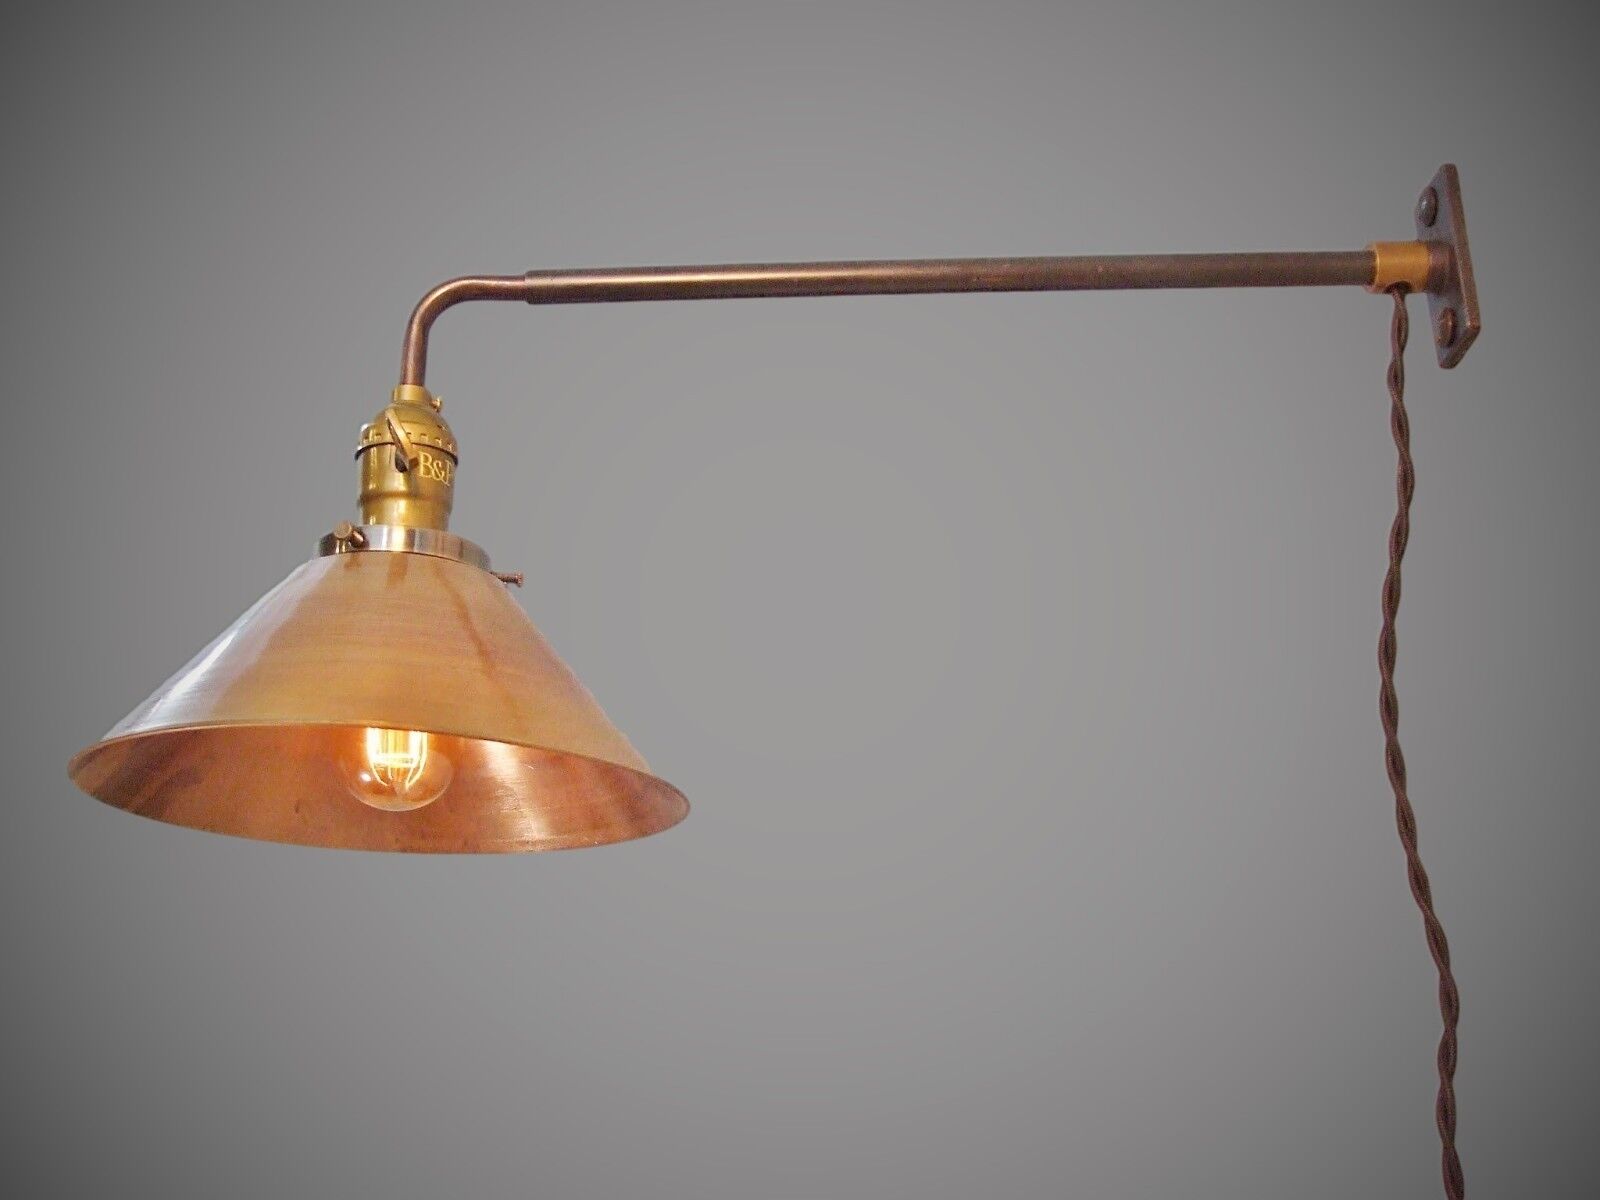 Vintage Industrial Wall Mount Light - BRASS SHADE - Machine Age Cage Lamp Sconce